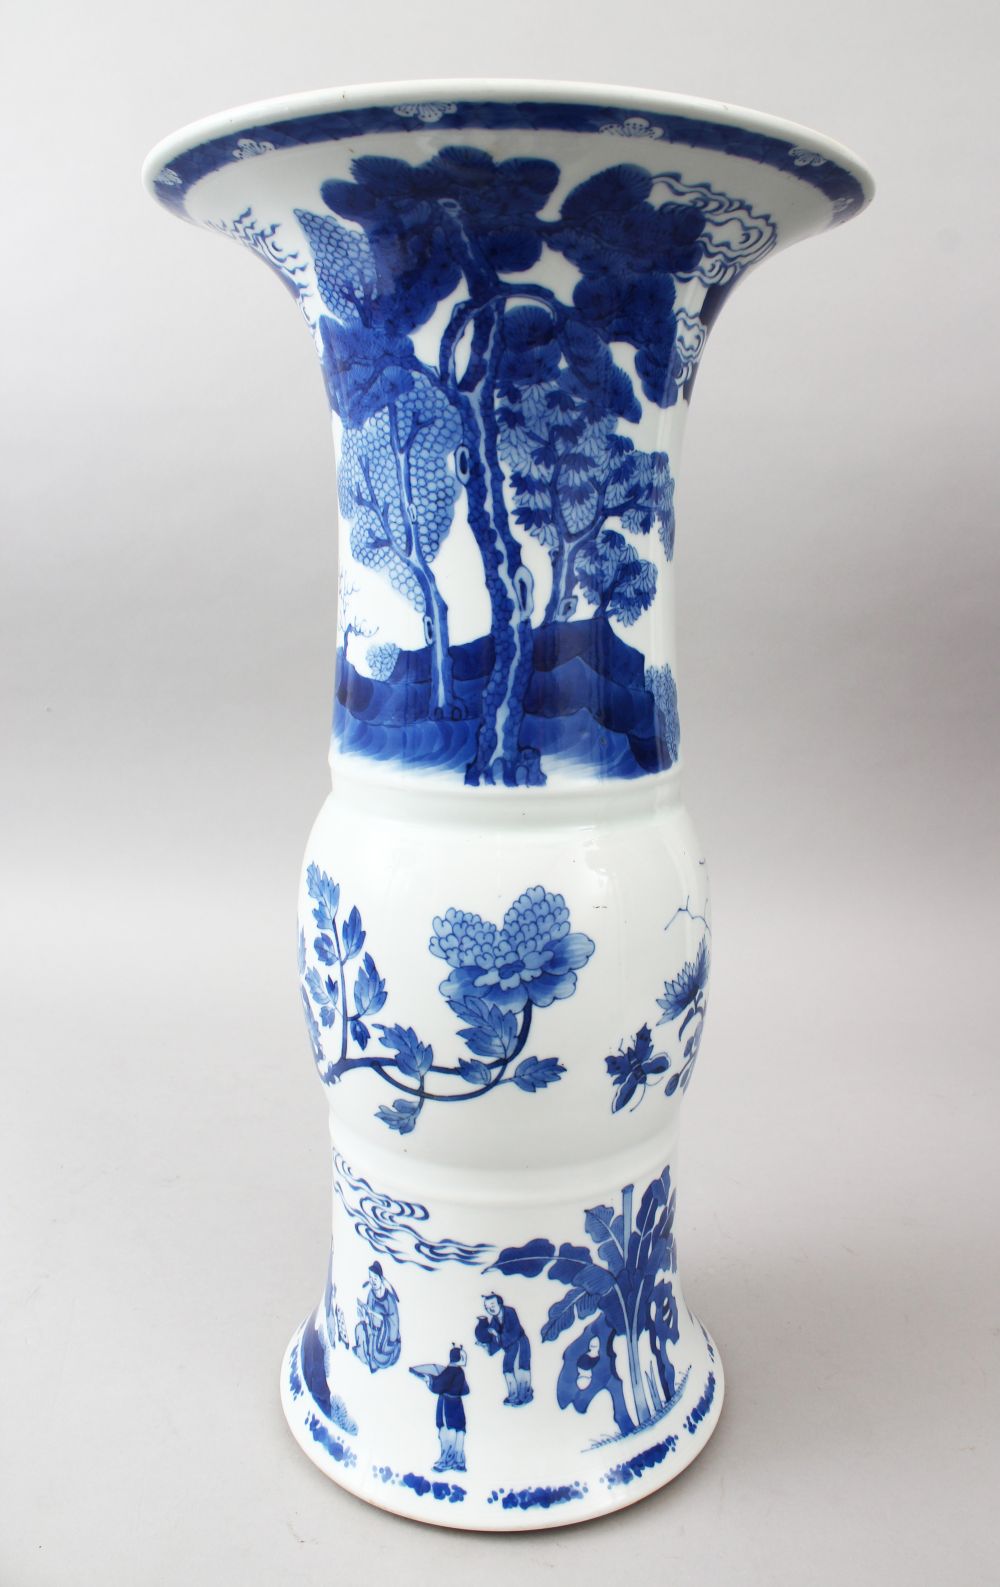 A LARGE CHINESE BLUE & WHITE PORCELAIN YEN YEN VASE, the body of the vase decorated with scenes of